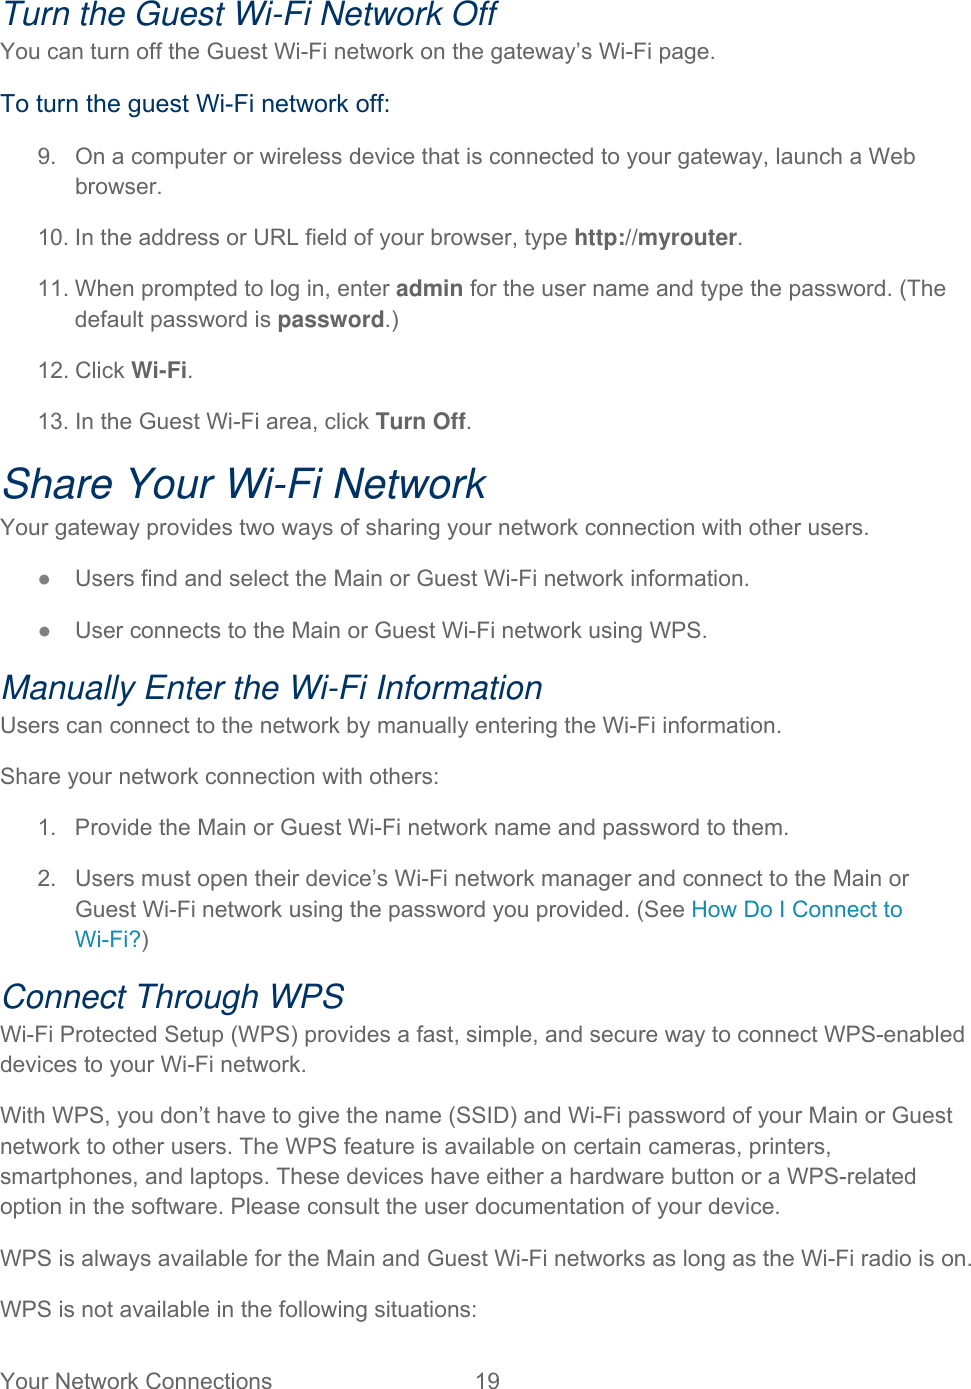 Your Network Connections  19   Turn the Guest Wi-Fi Network Off You can turn off the Guest Wi-Fi network on the gateway’s Wi-Fi page. To turn the guest Wi-Fi network off: 9.  On a computer or wireless device that is connected to your gateway, launch a Web browser. 10. In the address or URL field of your browser, type http://myrouter.  11. When prompted to log in, enter admin for the user name and type the password. (The default password is password.) 12. Click Wi-Fi. 13. In the Guest Wi-Fi area, click Turn Off. Share Your Wi-Fi Network Your gateway provides two ways of sharing your network connection with other users. ● Users find and select the Main or Guest Wi-Fi network information. ● User connects to the Main or Guest Wi-Fi network using WPS. Manually Enter the Wi-Fi Information Users can connect to the network by manually entering the Wi-Fi information. Share your network connection with others: 1.  Provide the Main or Guest Wi-Fi network name and password to them. 2.  Users must open their device’s Wi-Fi network manager and connect to the Main or Guest Wi-Fi network using the password you provided. (See How Do I Connect to Wi-Fi?) Connect Through WPS Wi-Fi Protected Setup (WPS) provides a fast, simple, and secure way to connect WPS-enabled devices to your Wi-Fi network.  With WPS, you don’t have to give the name (SSID) and Wi-Fi password of your Main or Guest network to other users. The WPS feature is available on certain cameras, printers, smartphones, and laptops. These devices have either a hardware button or a WPS-related option in the software. Please consult the user documentation of your device. WPS is always available for the Main and Guest Wi-Fi networks as long as the Wi-Fi radio is on. WPS is not available in the following situations: 